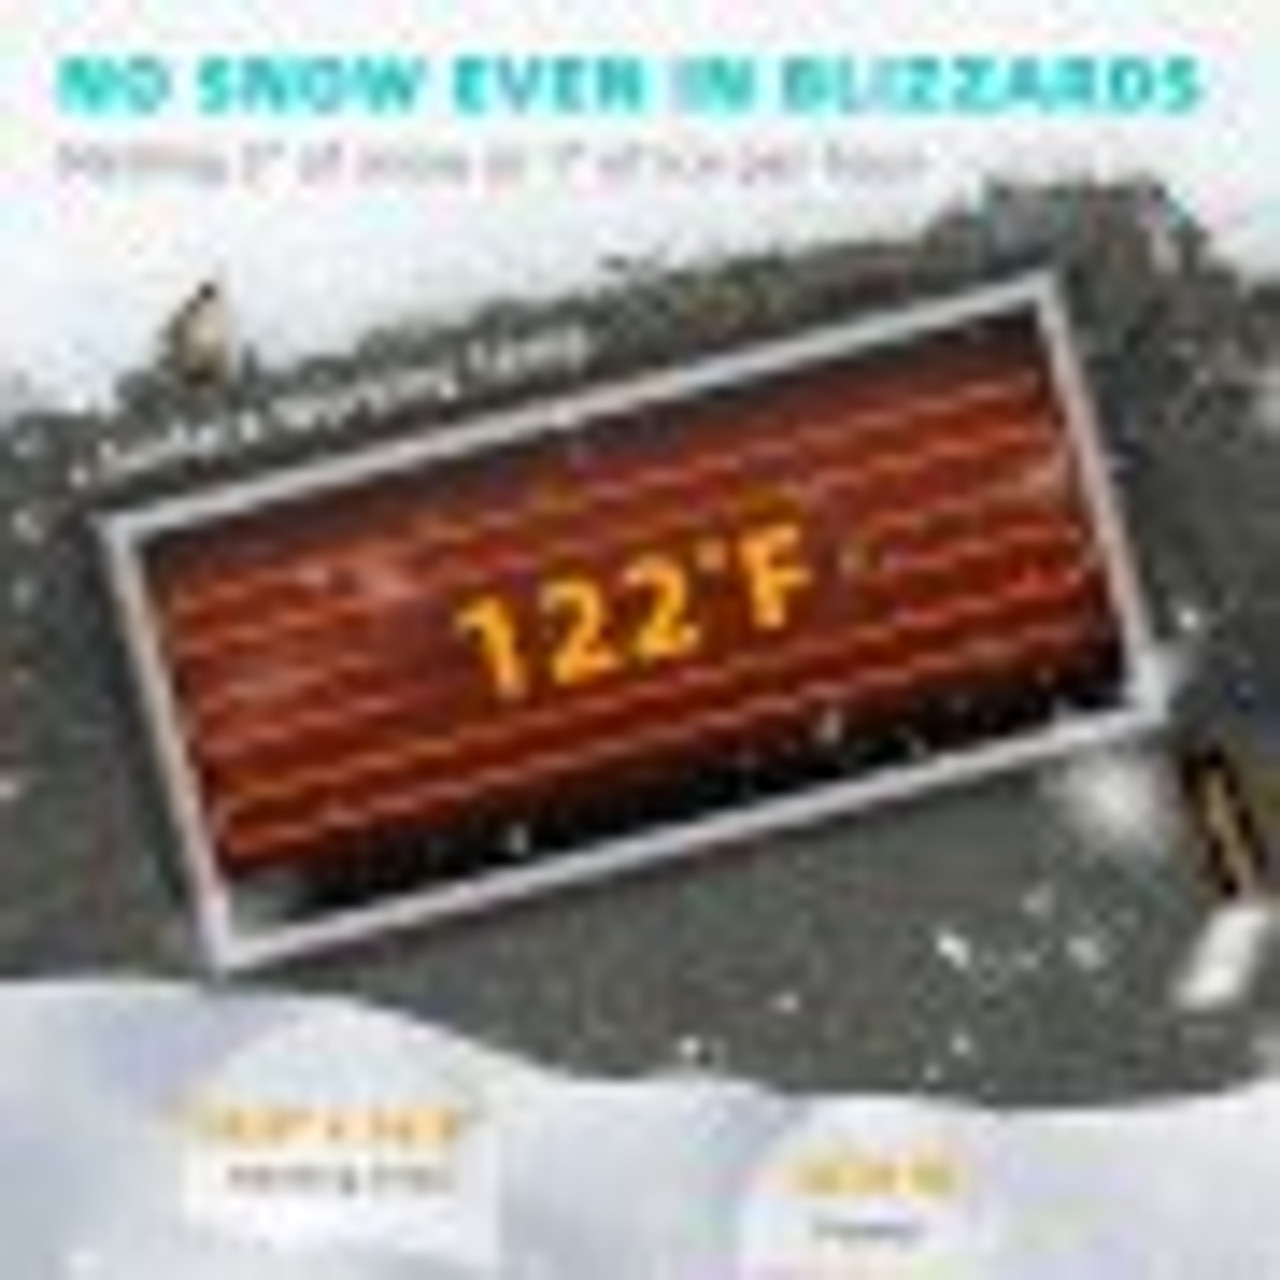 Snow Melting Mat, 20in x 30in 120V Heated Walkway Mat, PVC Heated